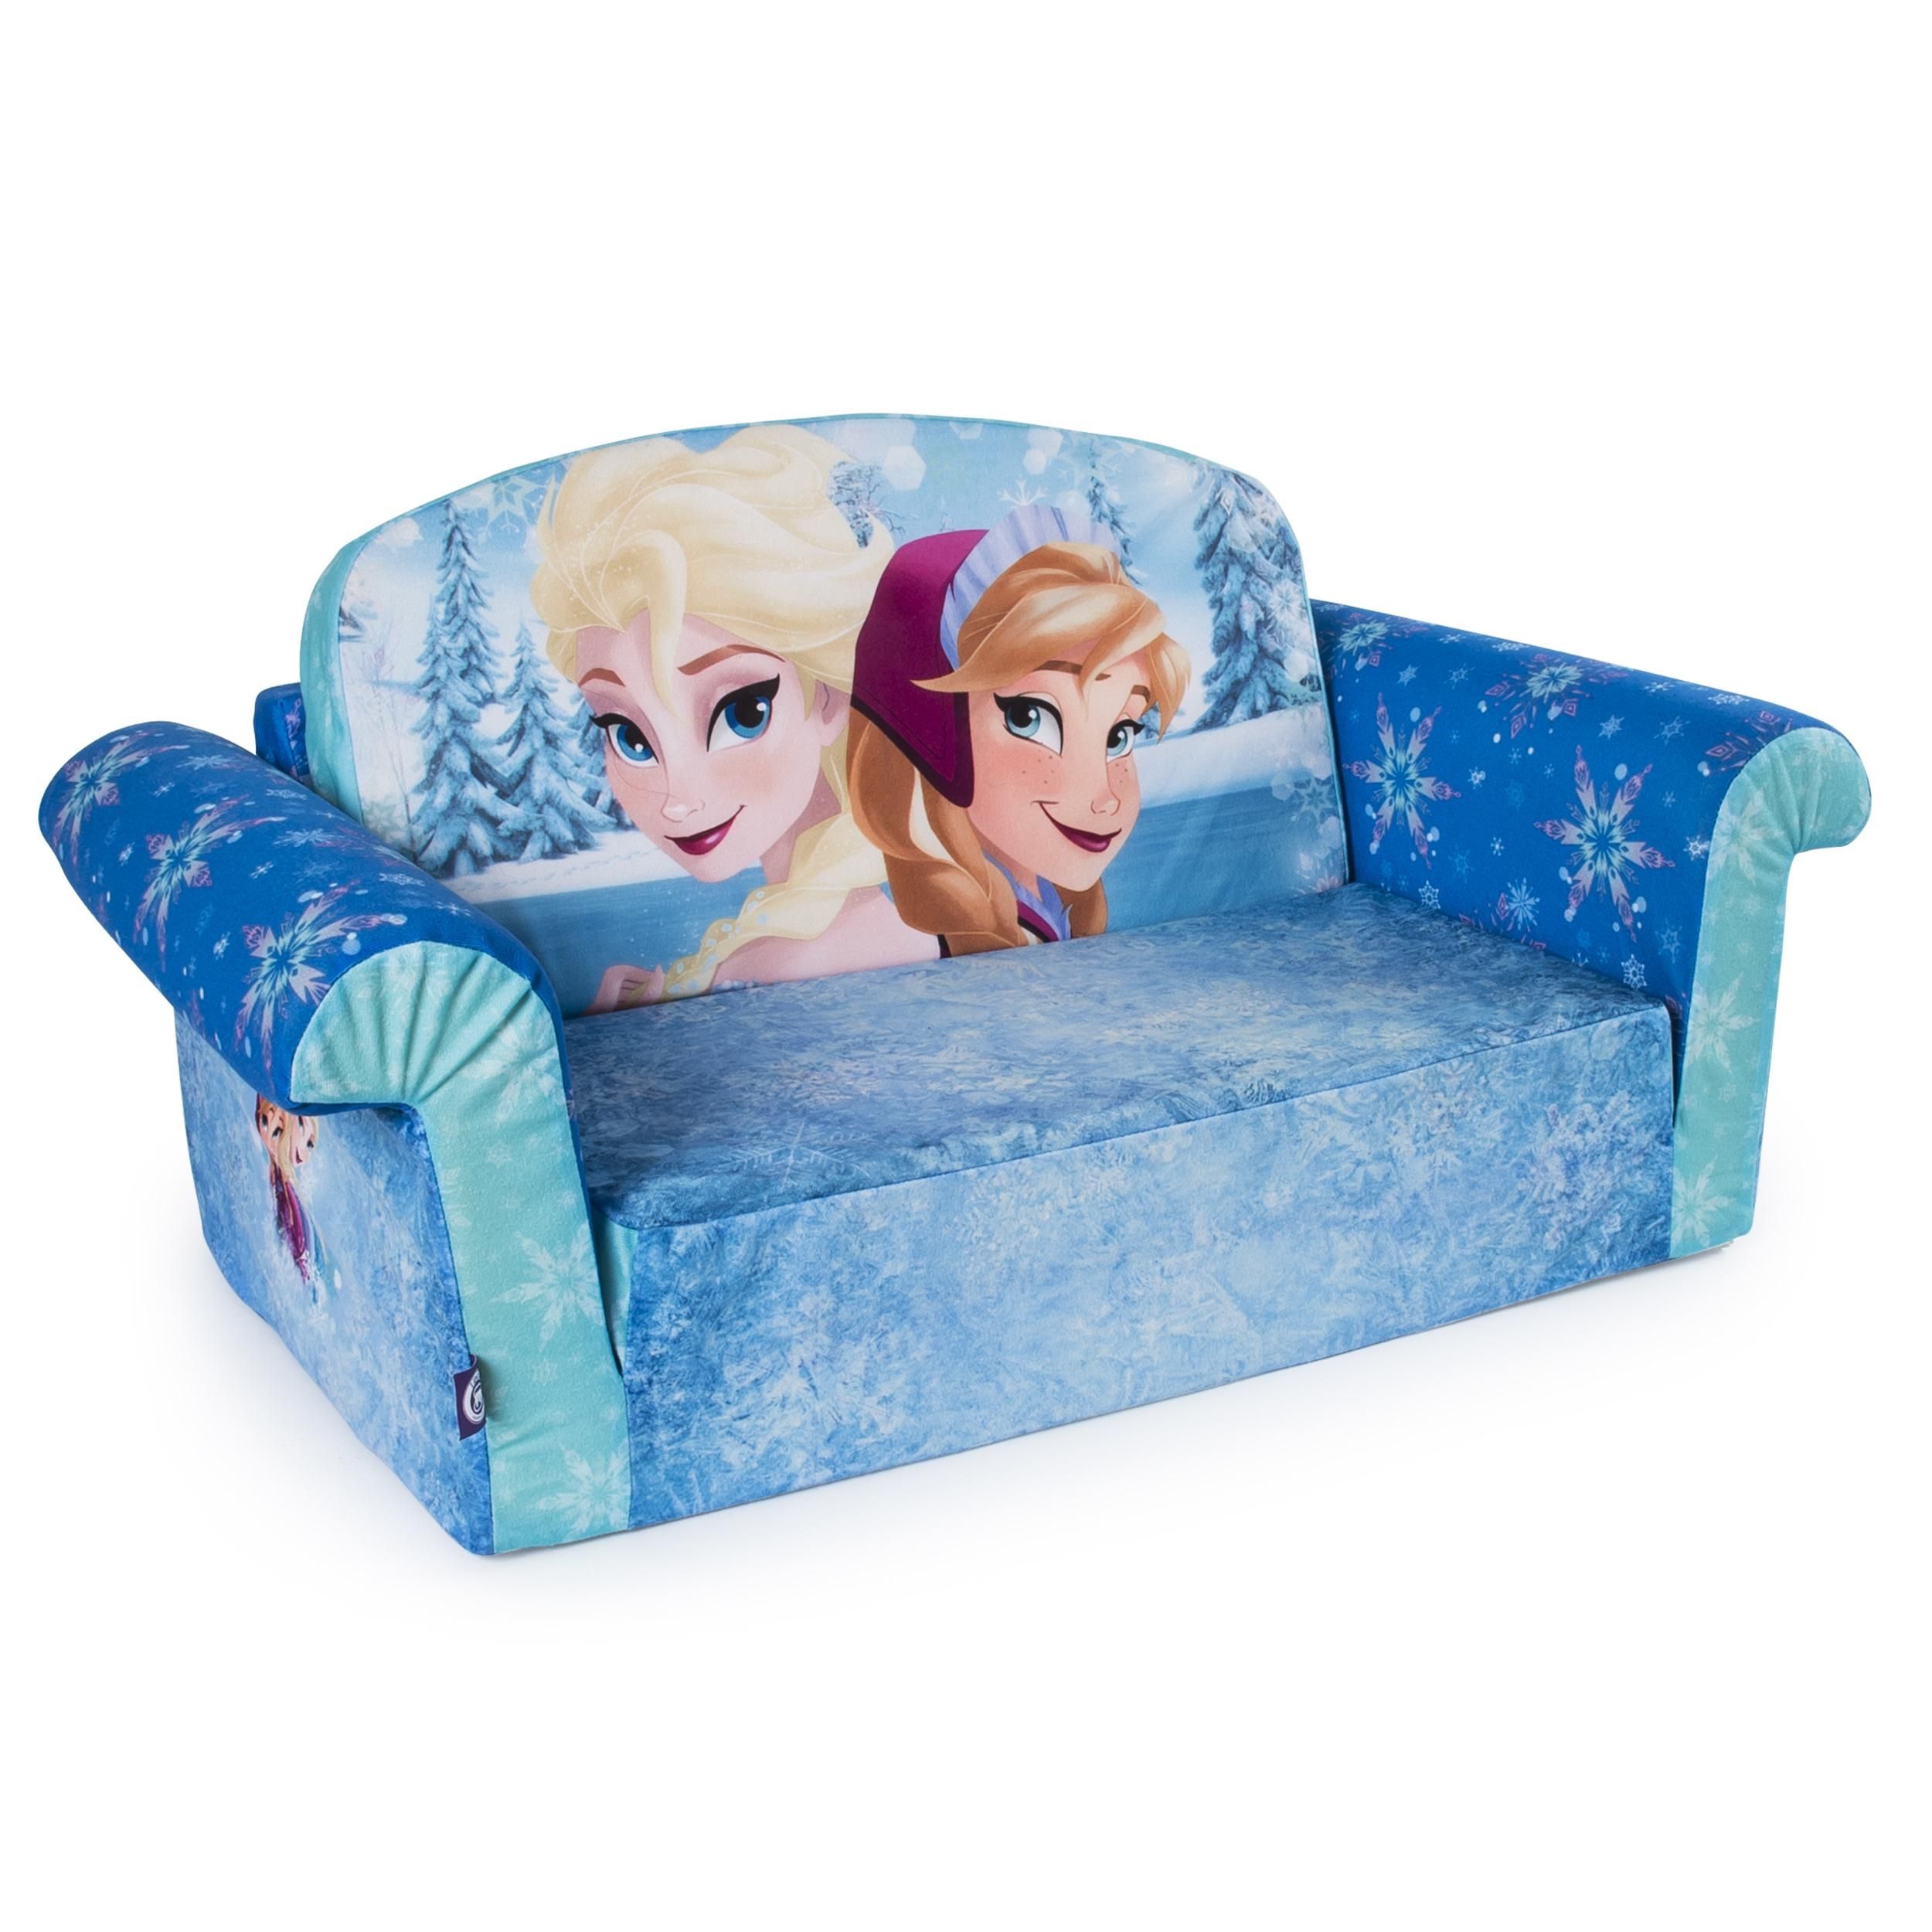 Marshmallow Furniture, Children's 2 In 1 Flip Open Foam Sofa Within Disney Princess Couches (View 12 of 20)